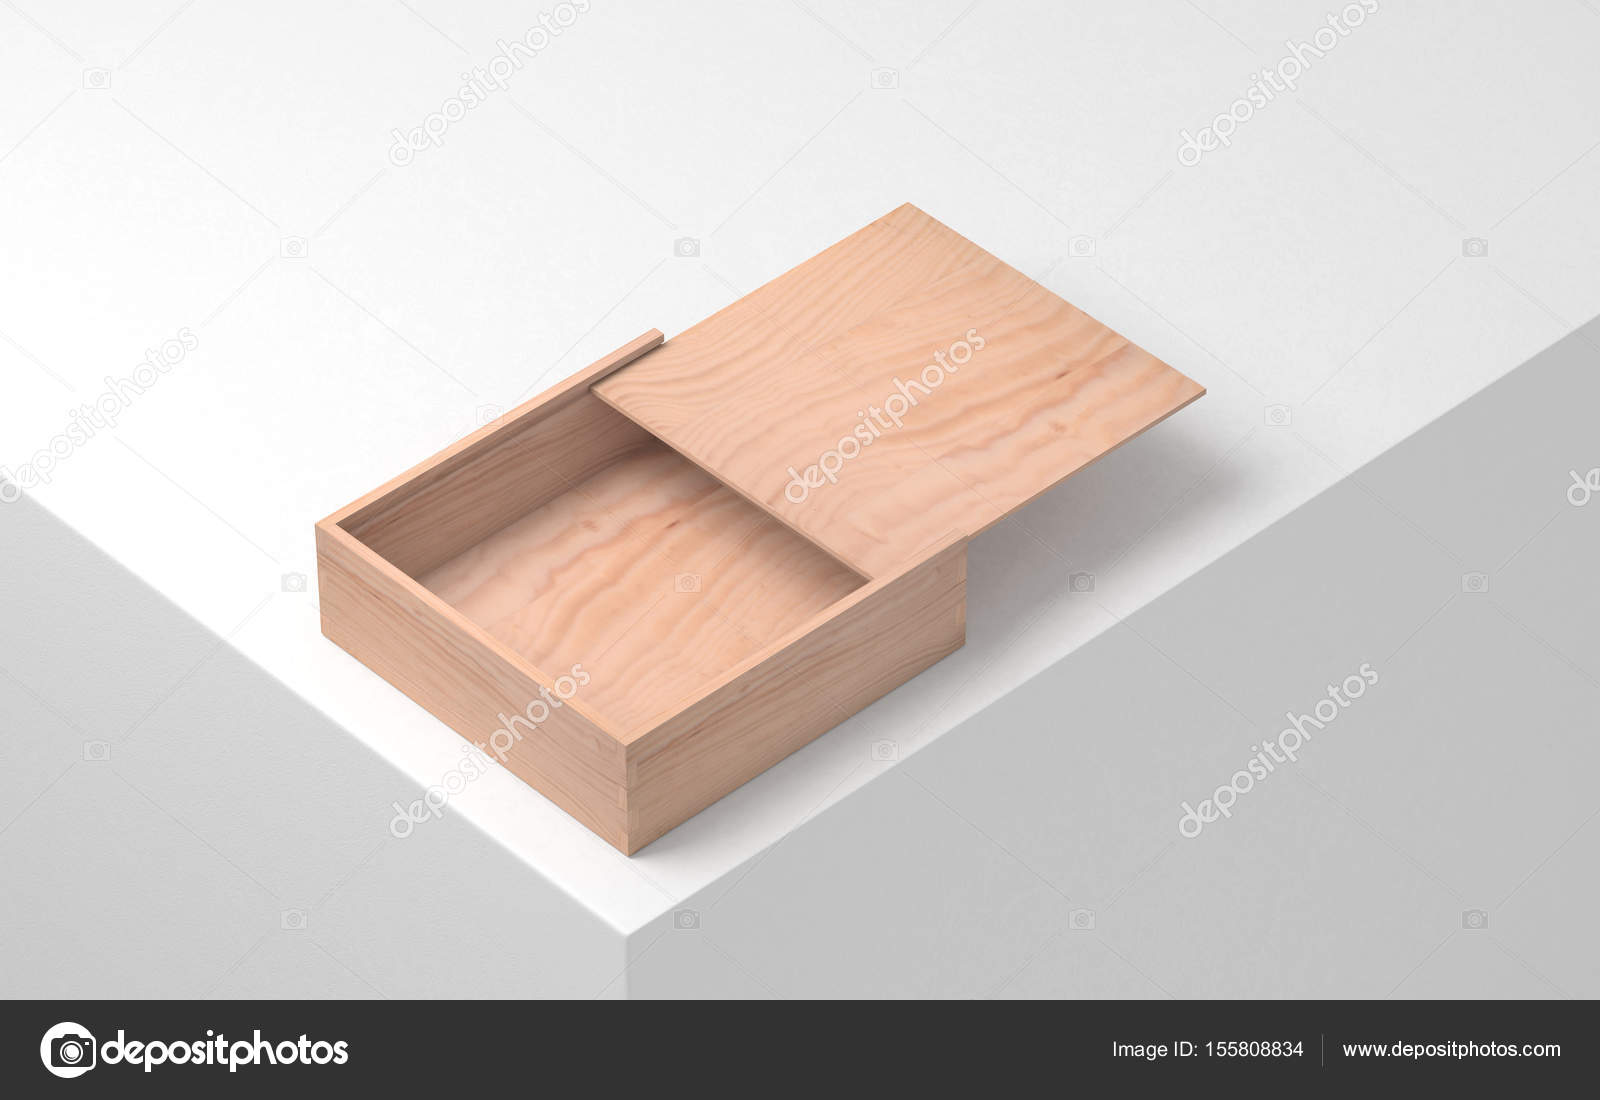 Download Opened Square Wooden Box Mockup Casket Packaging 3d Rendering Royalty Free Photo Stock Image By C Customdesigner 155808834